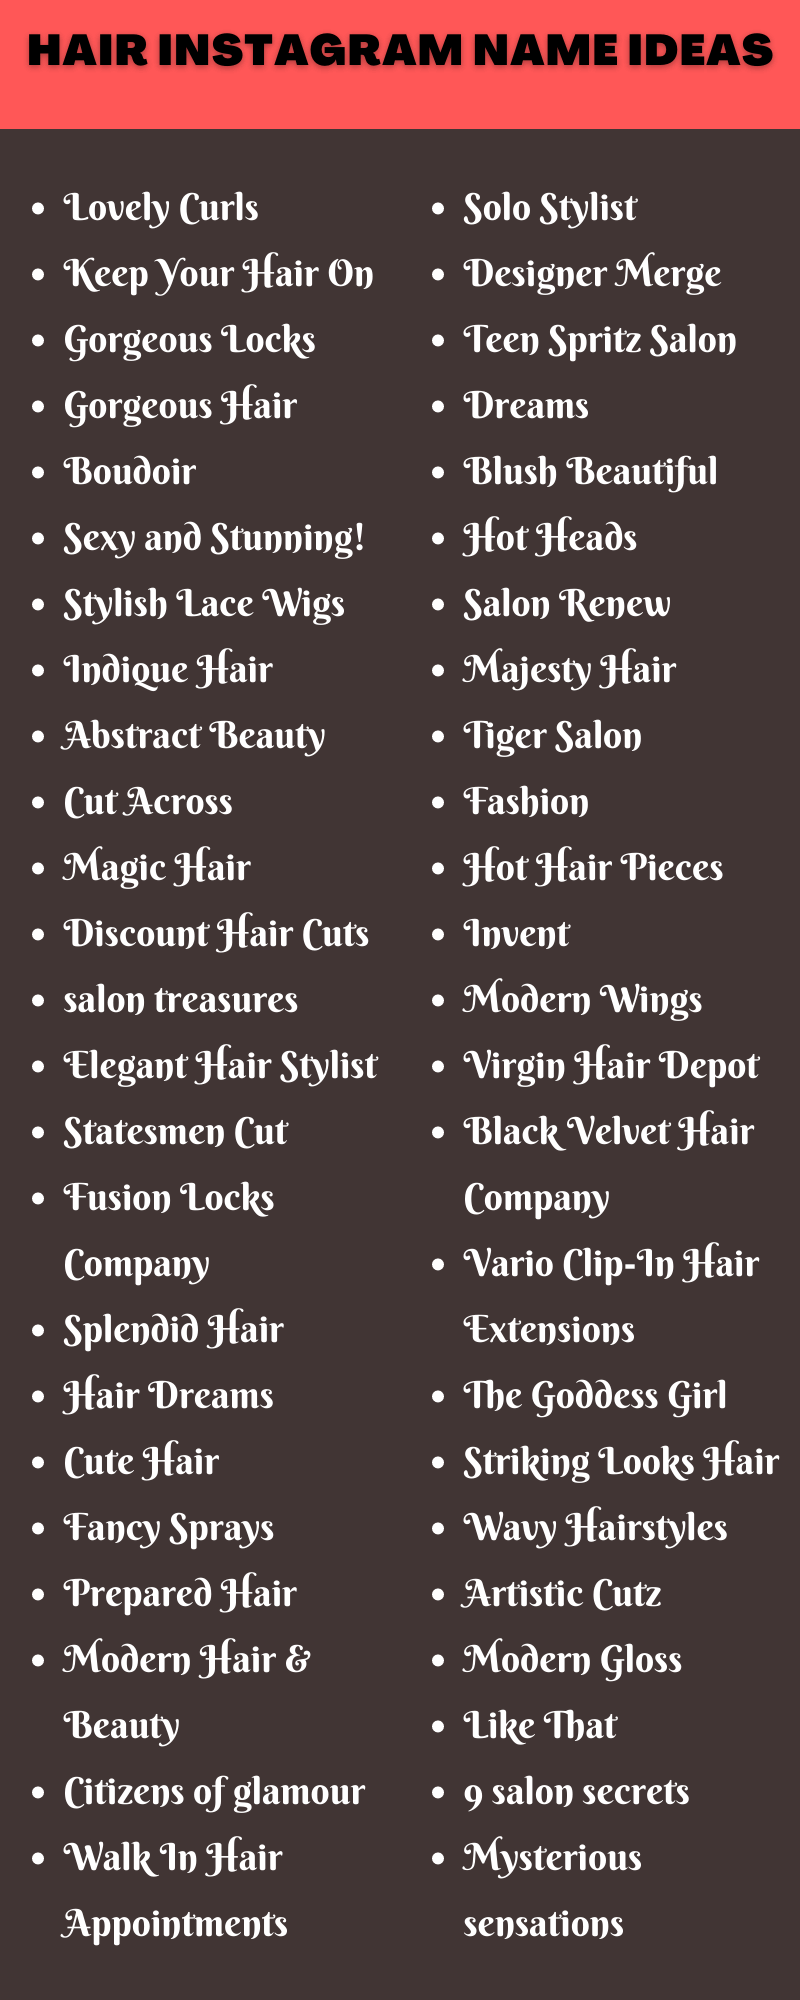 400 Cute Hair Instagram Name Ideas and Suggestions